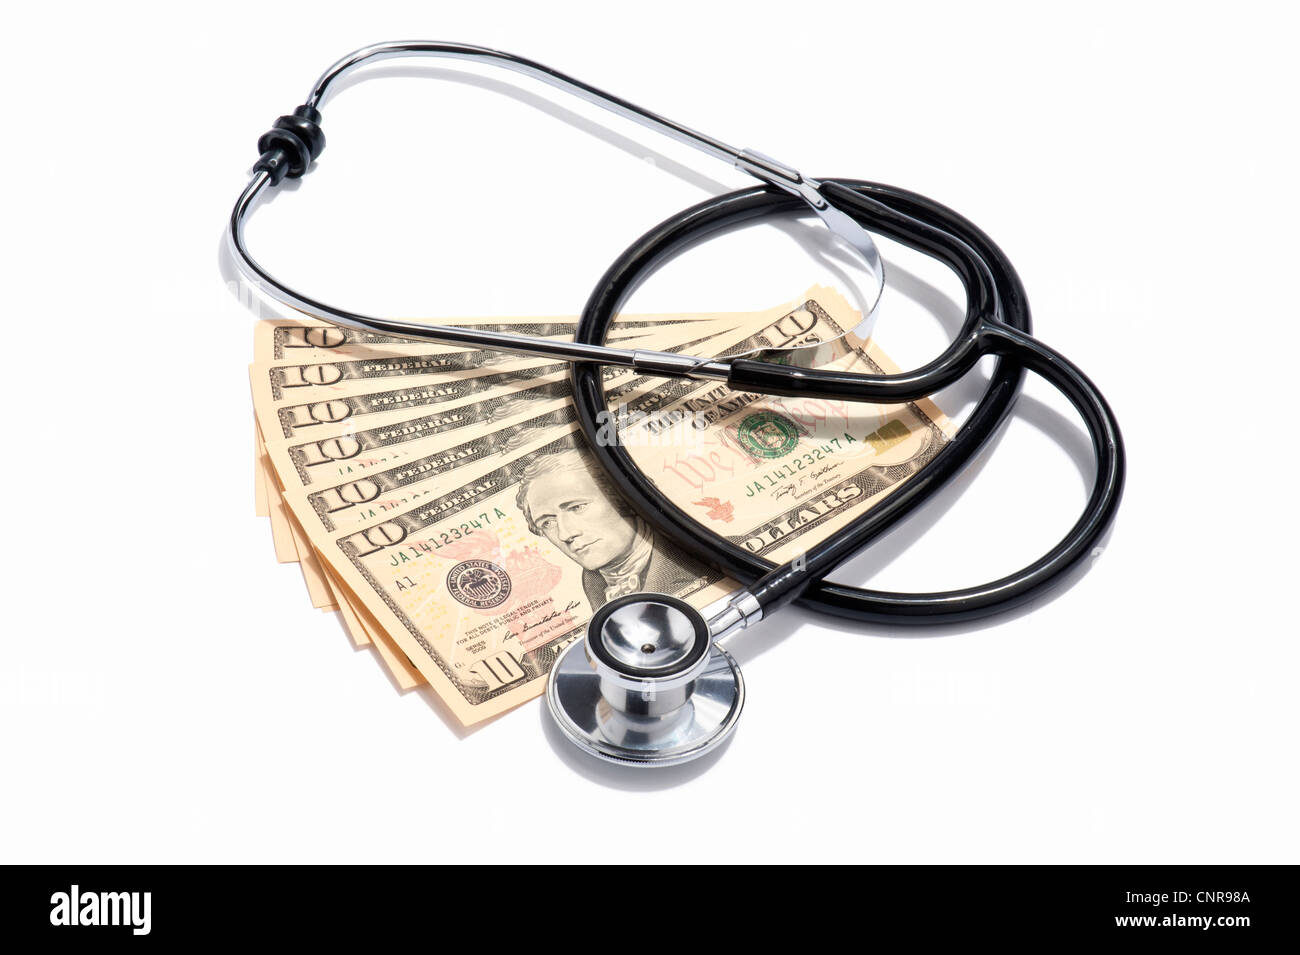 A doctors stethoscope and US dollar notes Stock Photo